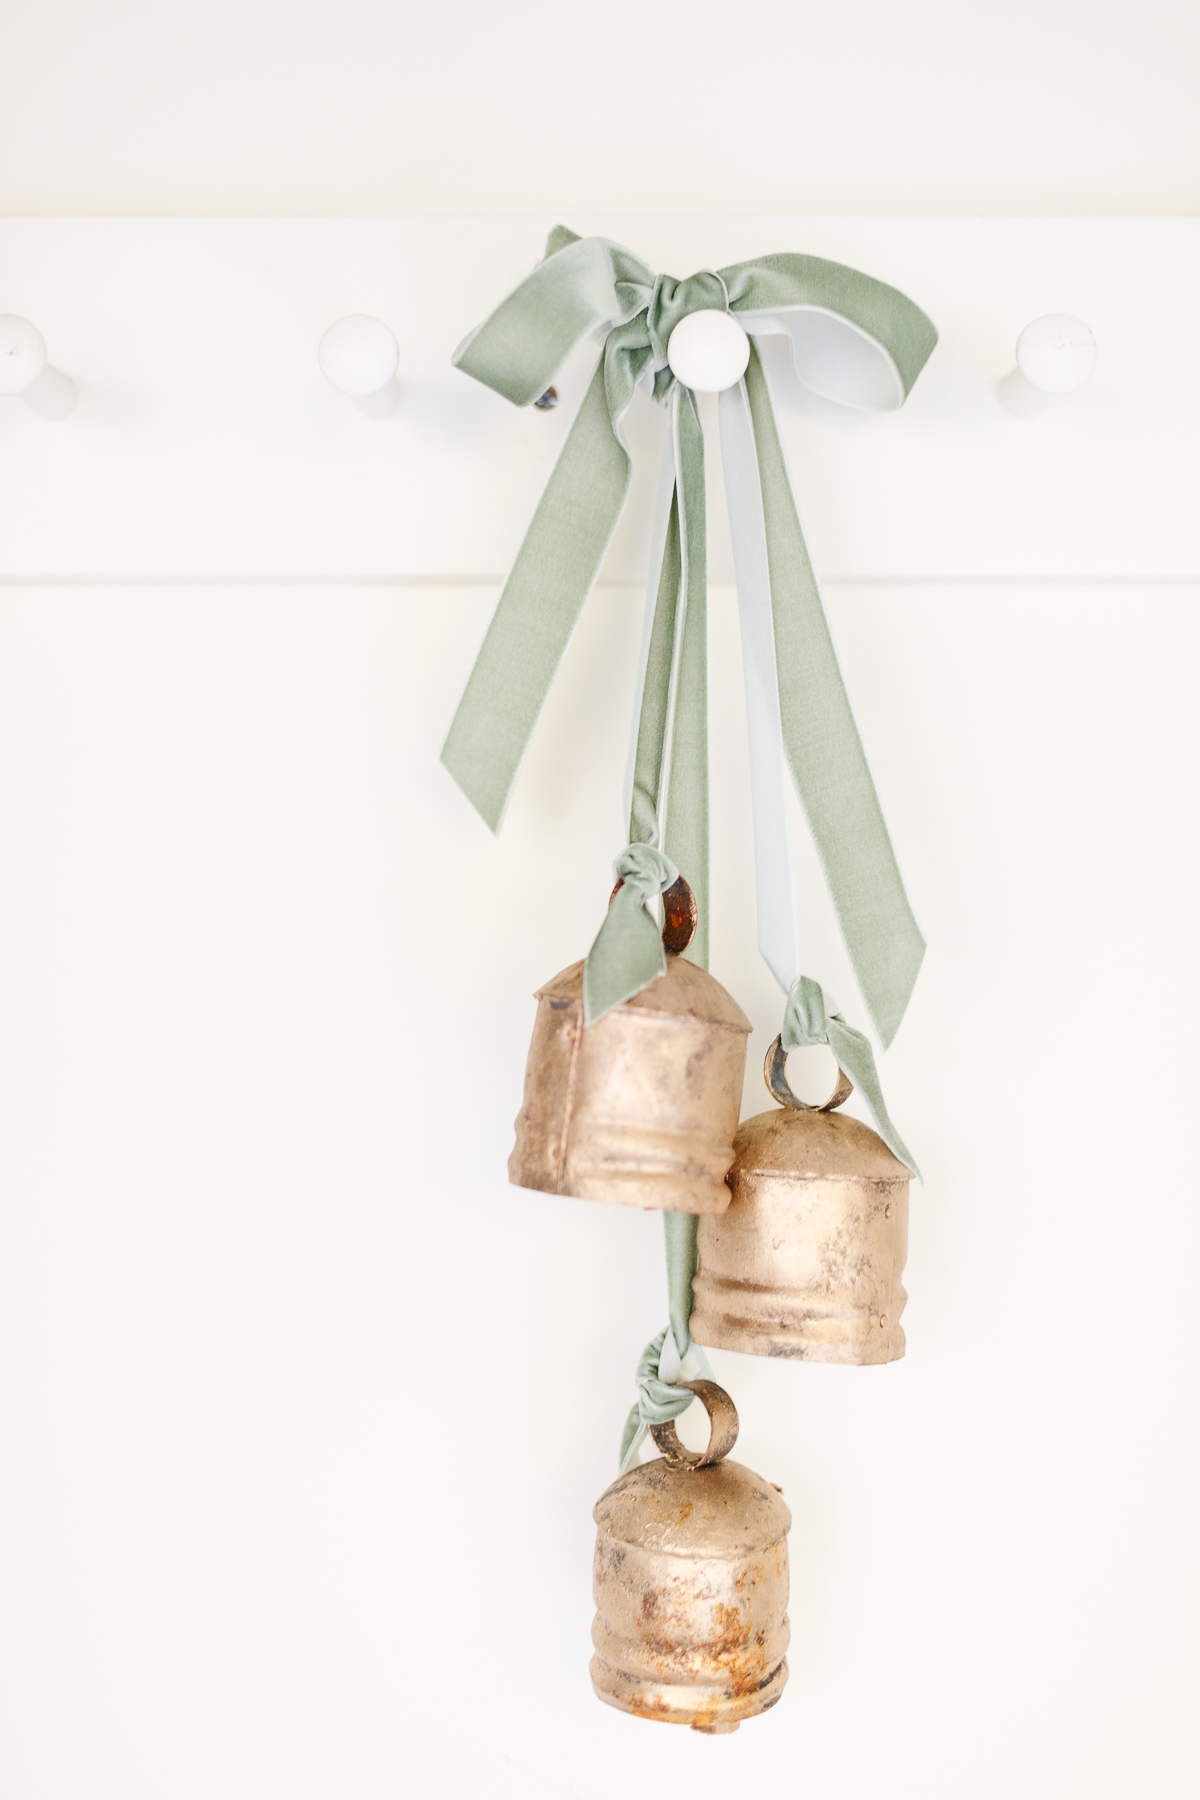 Three gold bells hanging on a white wall.